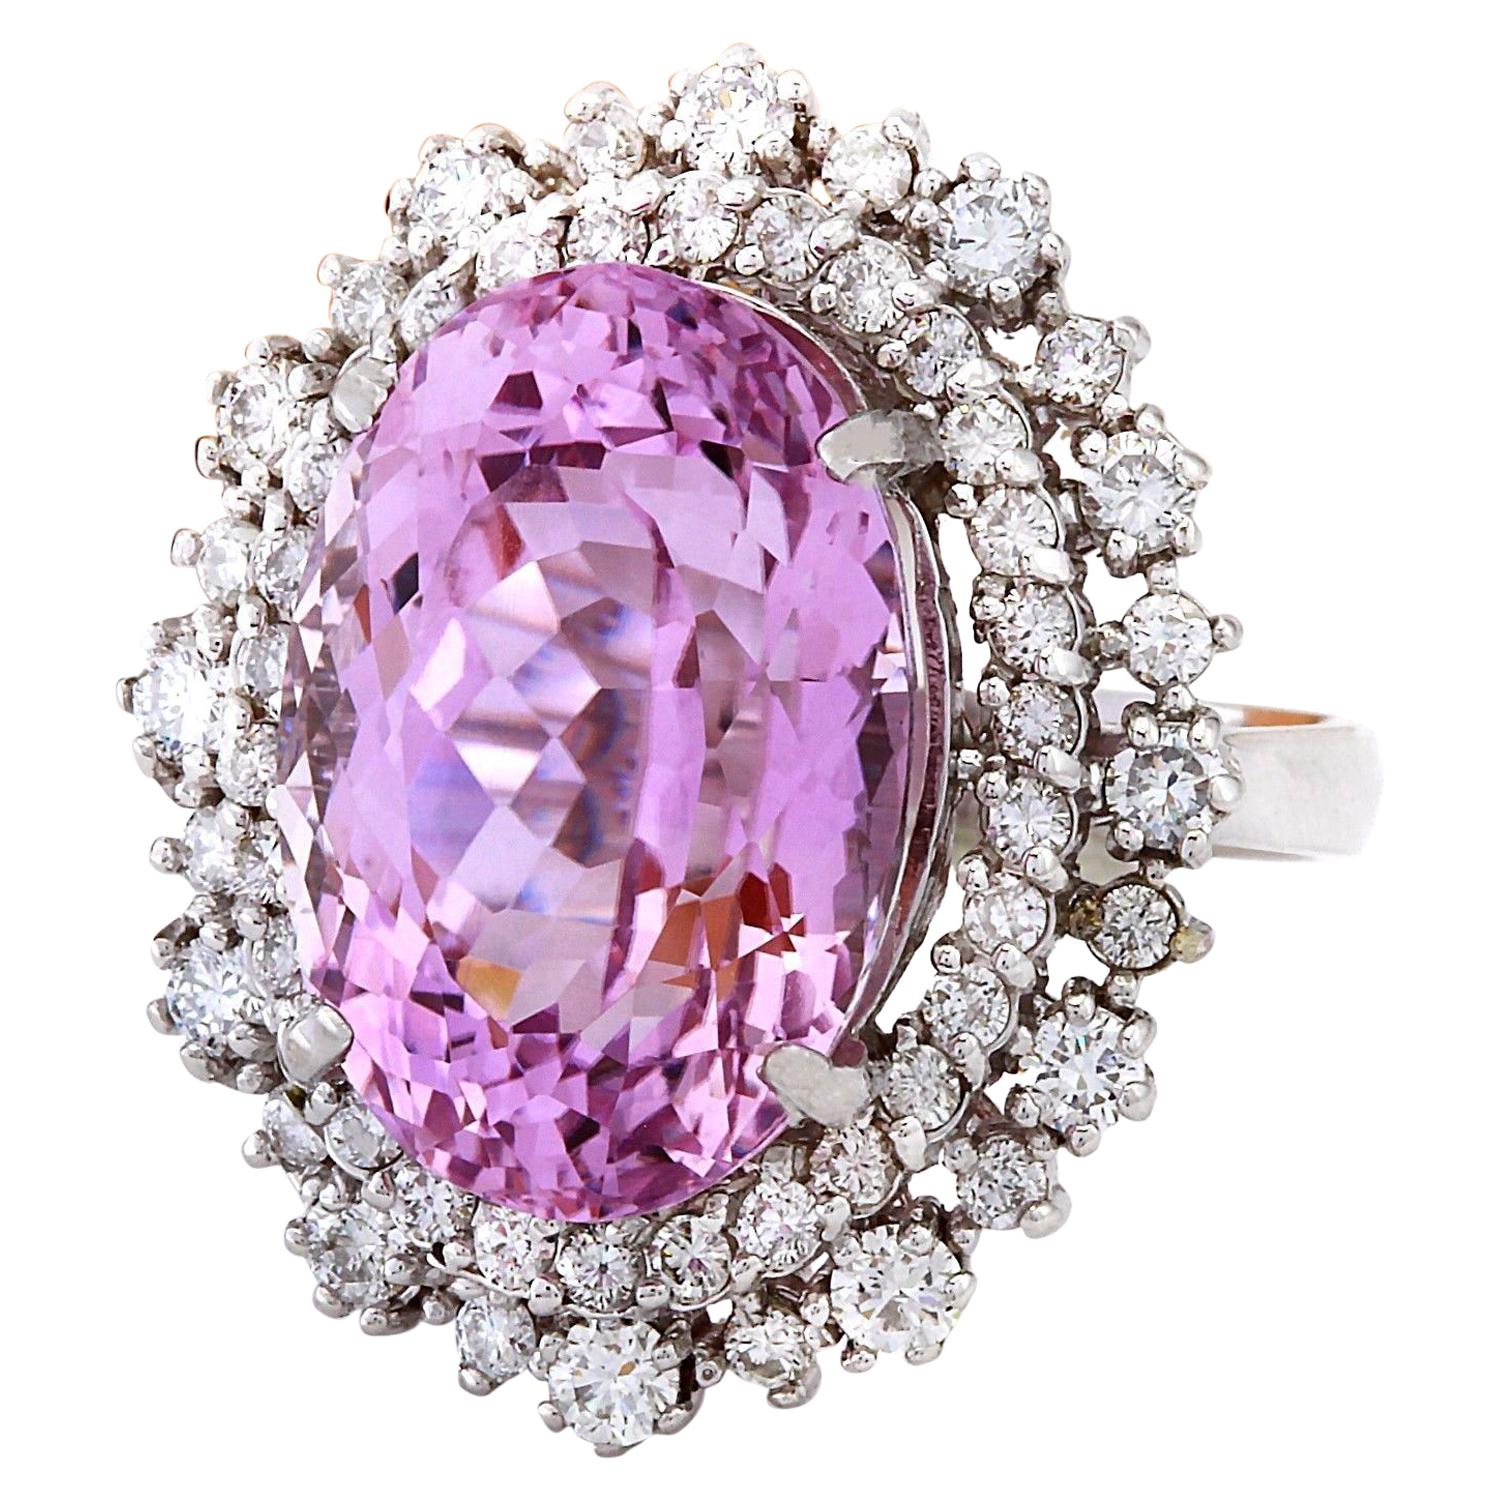 14.61 Carat Natural Kunzite 14K Solid White Gold Diamond Ring
 Item Type: Ring
 Item Style: Cocktail
 Material: 14K White Gold
 Mainstone: Kunzite
 Stone Color: Pink
 Stone Weight: 13.21 Carat
 Stone Shape: Oval
 Stone Quantity: 1
 Stone Dimensions: